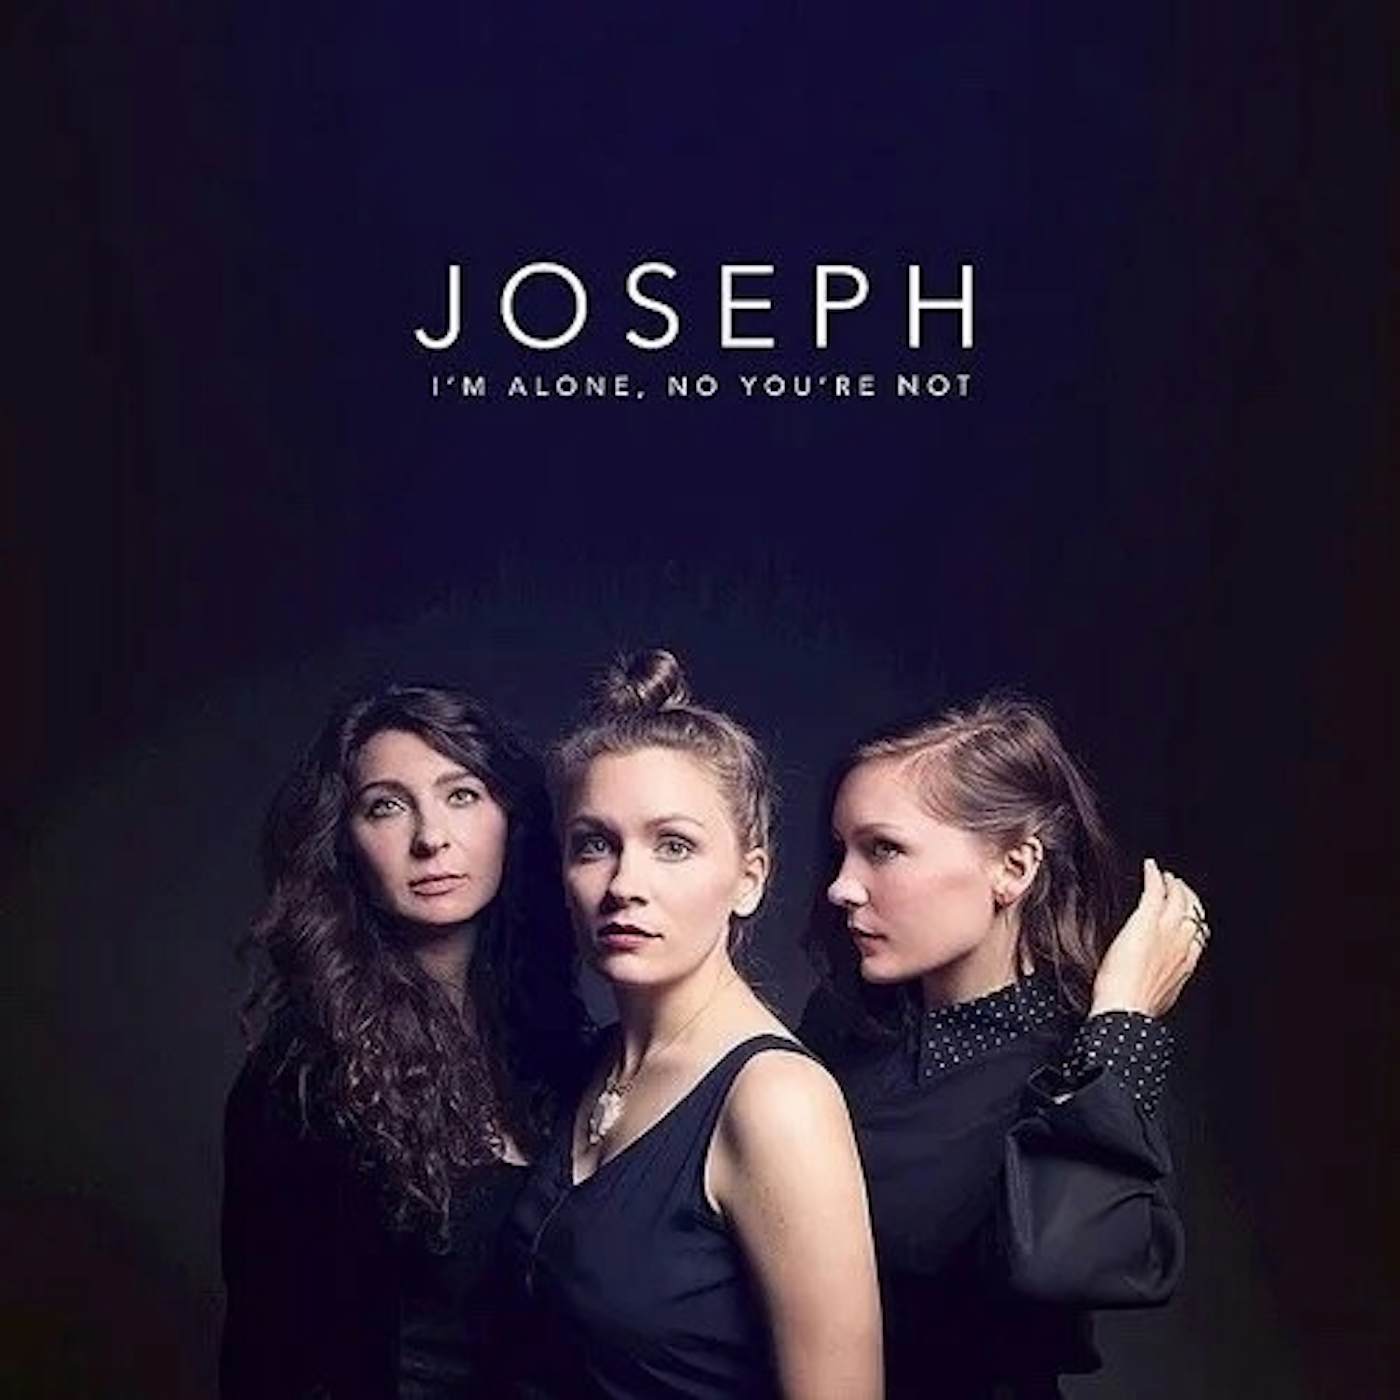 JOSEPH I'M ALONE, NO YOU'RE NOT (MOON PHASE EDITION) Vinyl Record